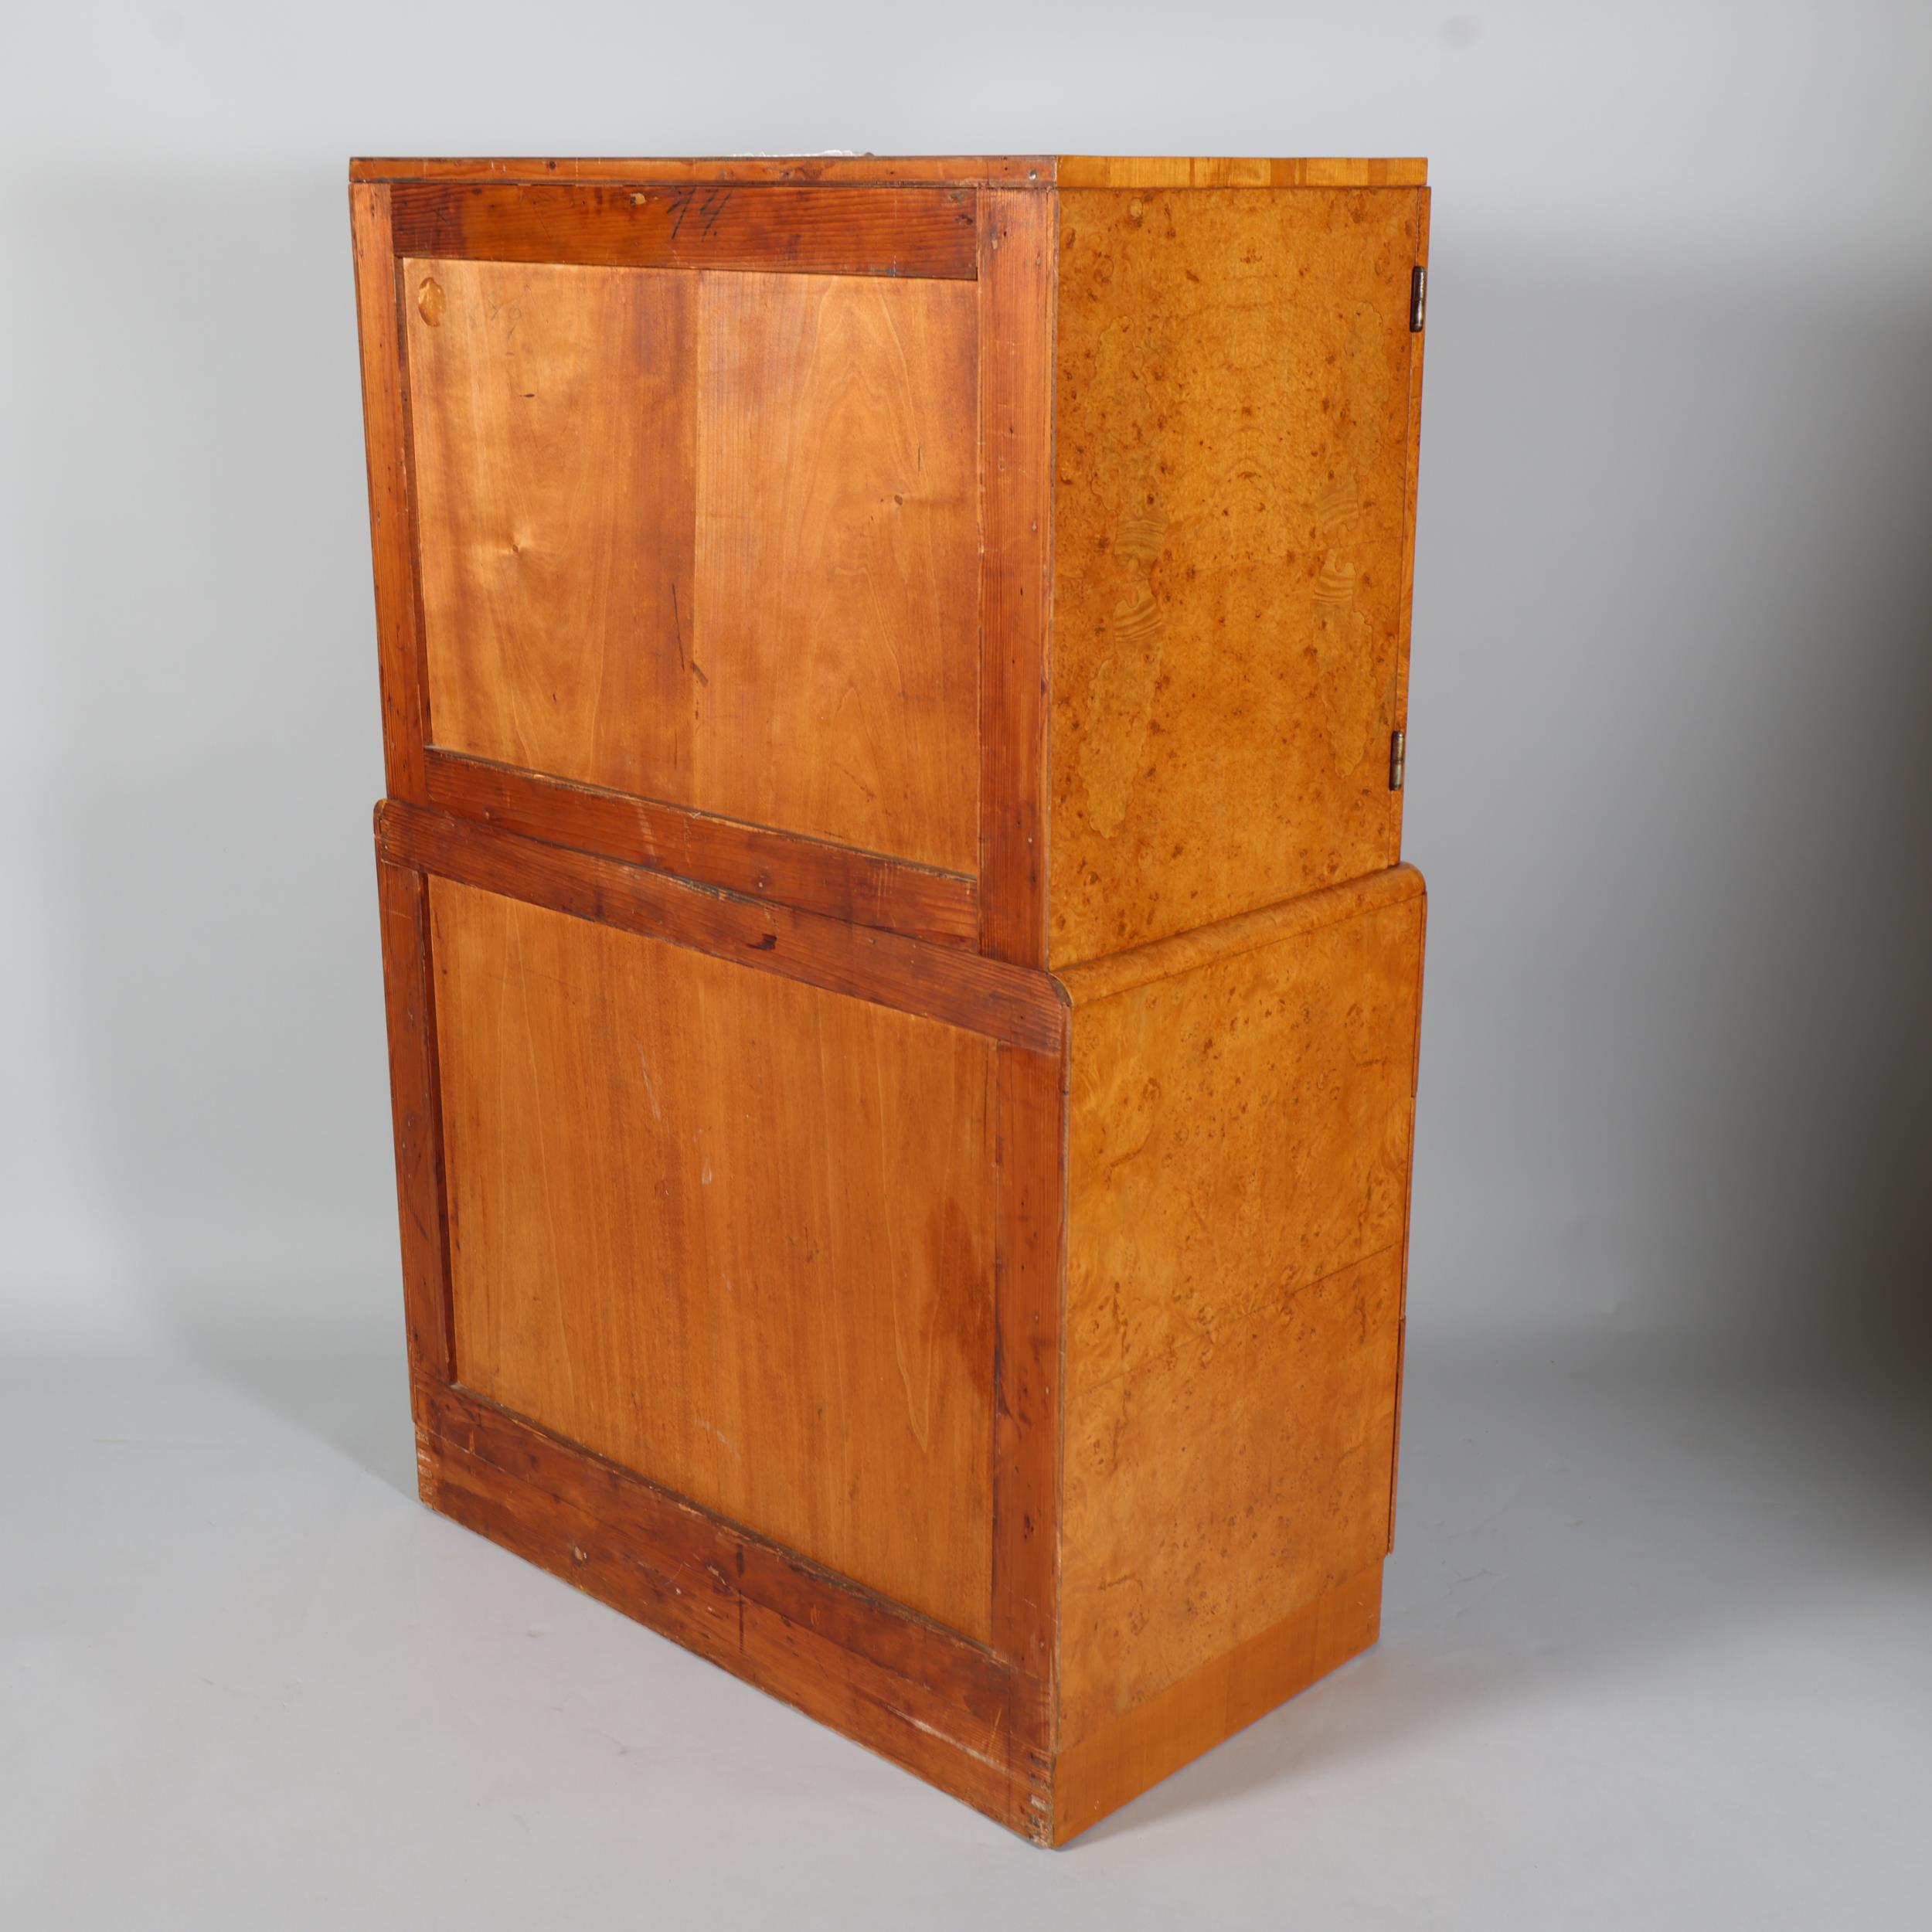 Art Deco birdseye maple tallboy, 2 doors above enclosing shelved interior with 3 long drawers - Image 5 of 5